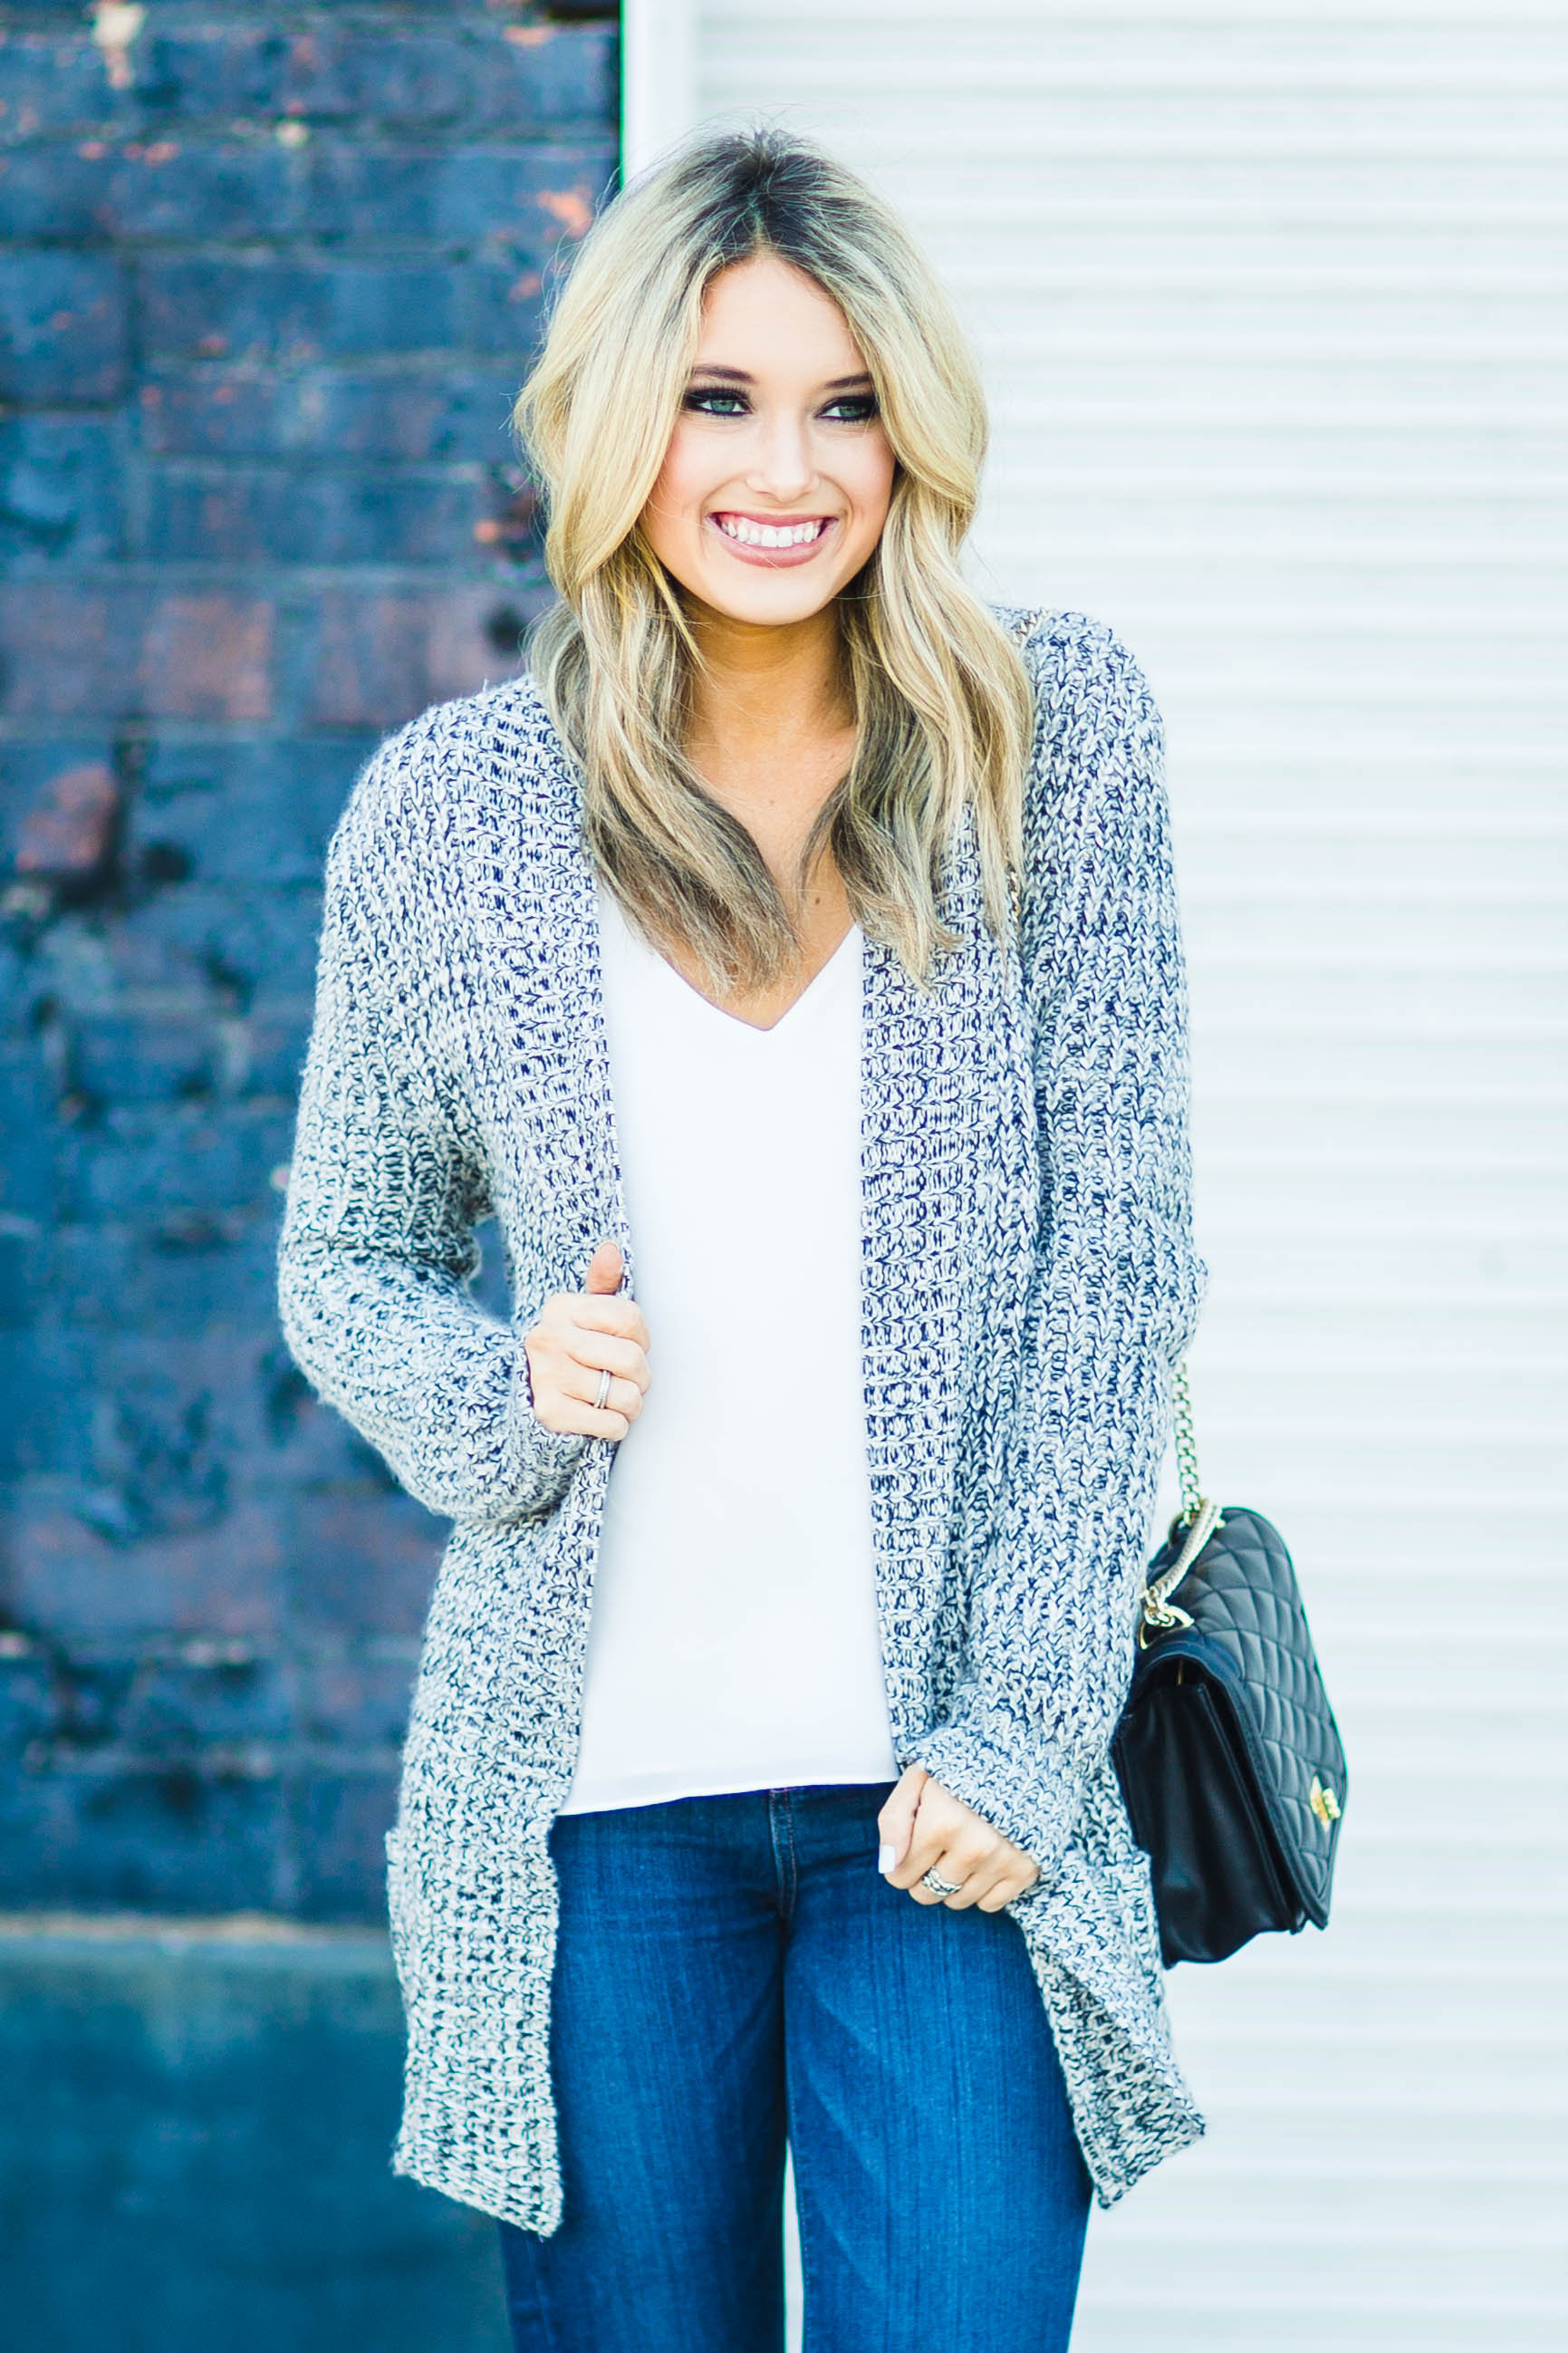 White Tank and Grey Cardigan – Champagne & Chanel